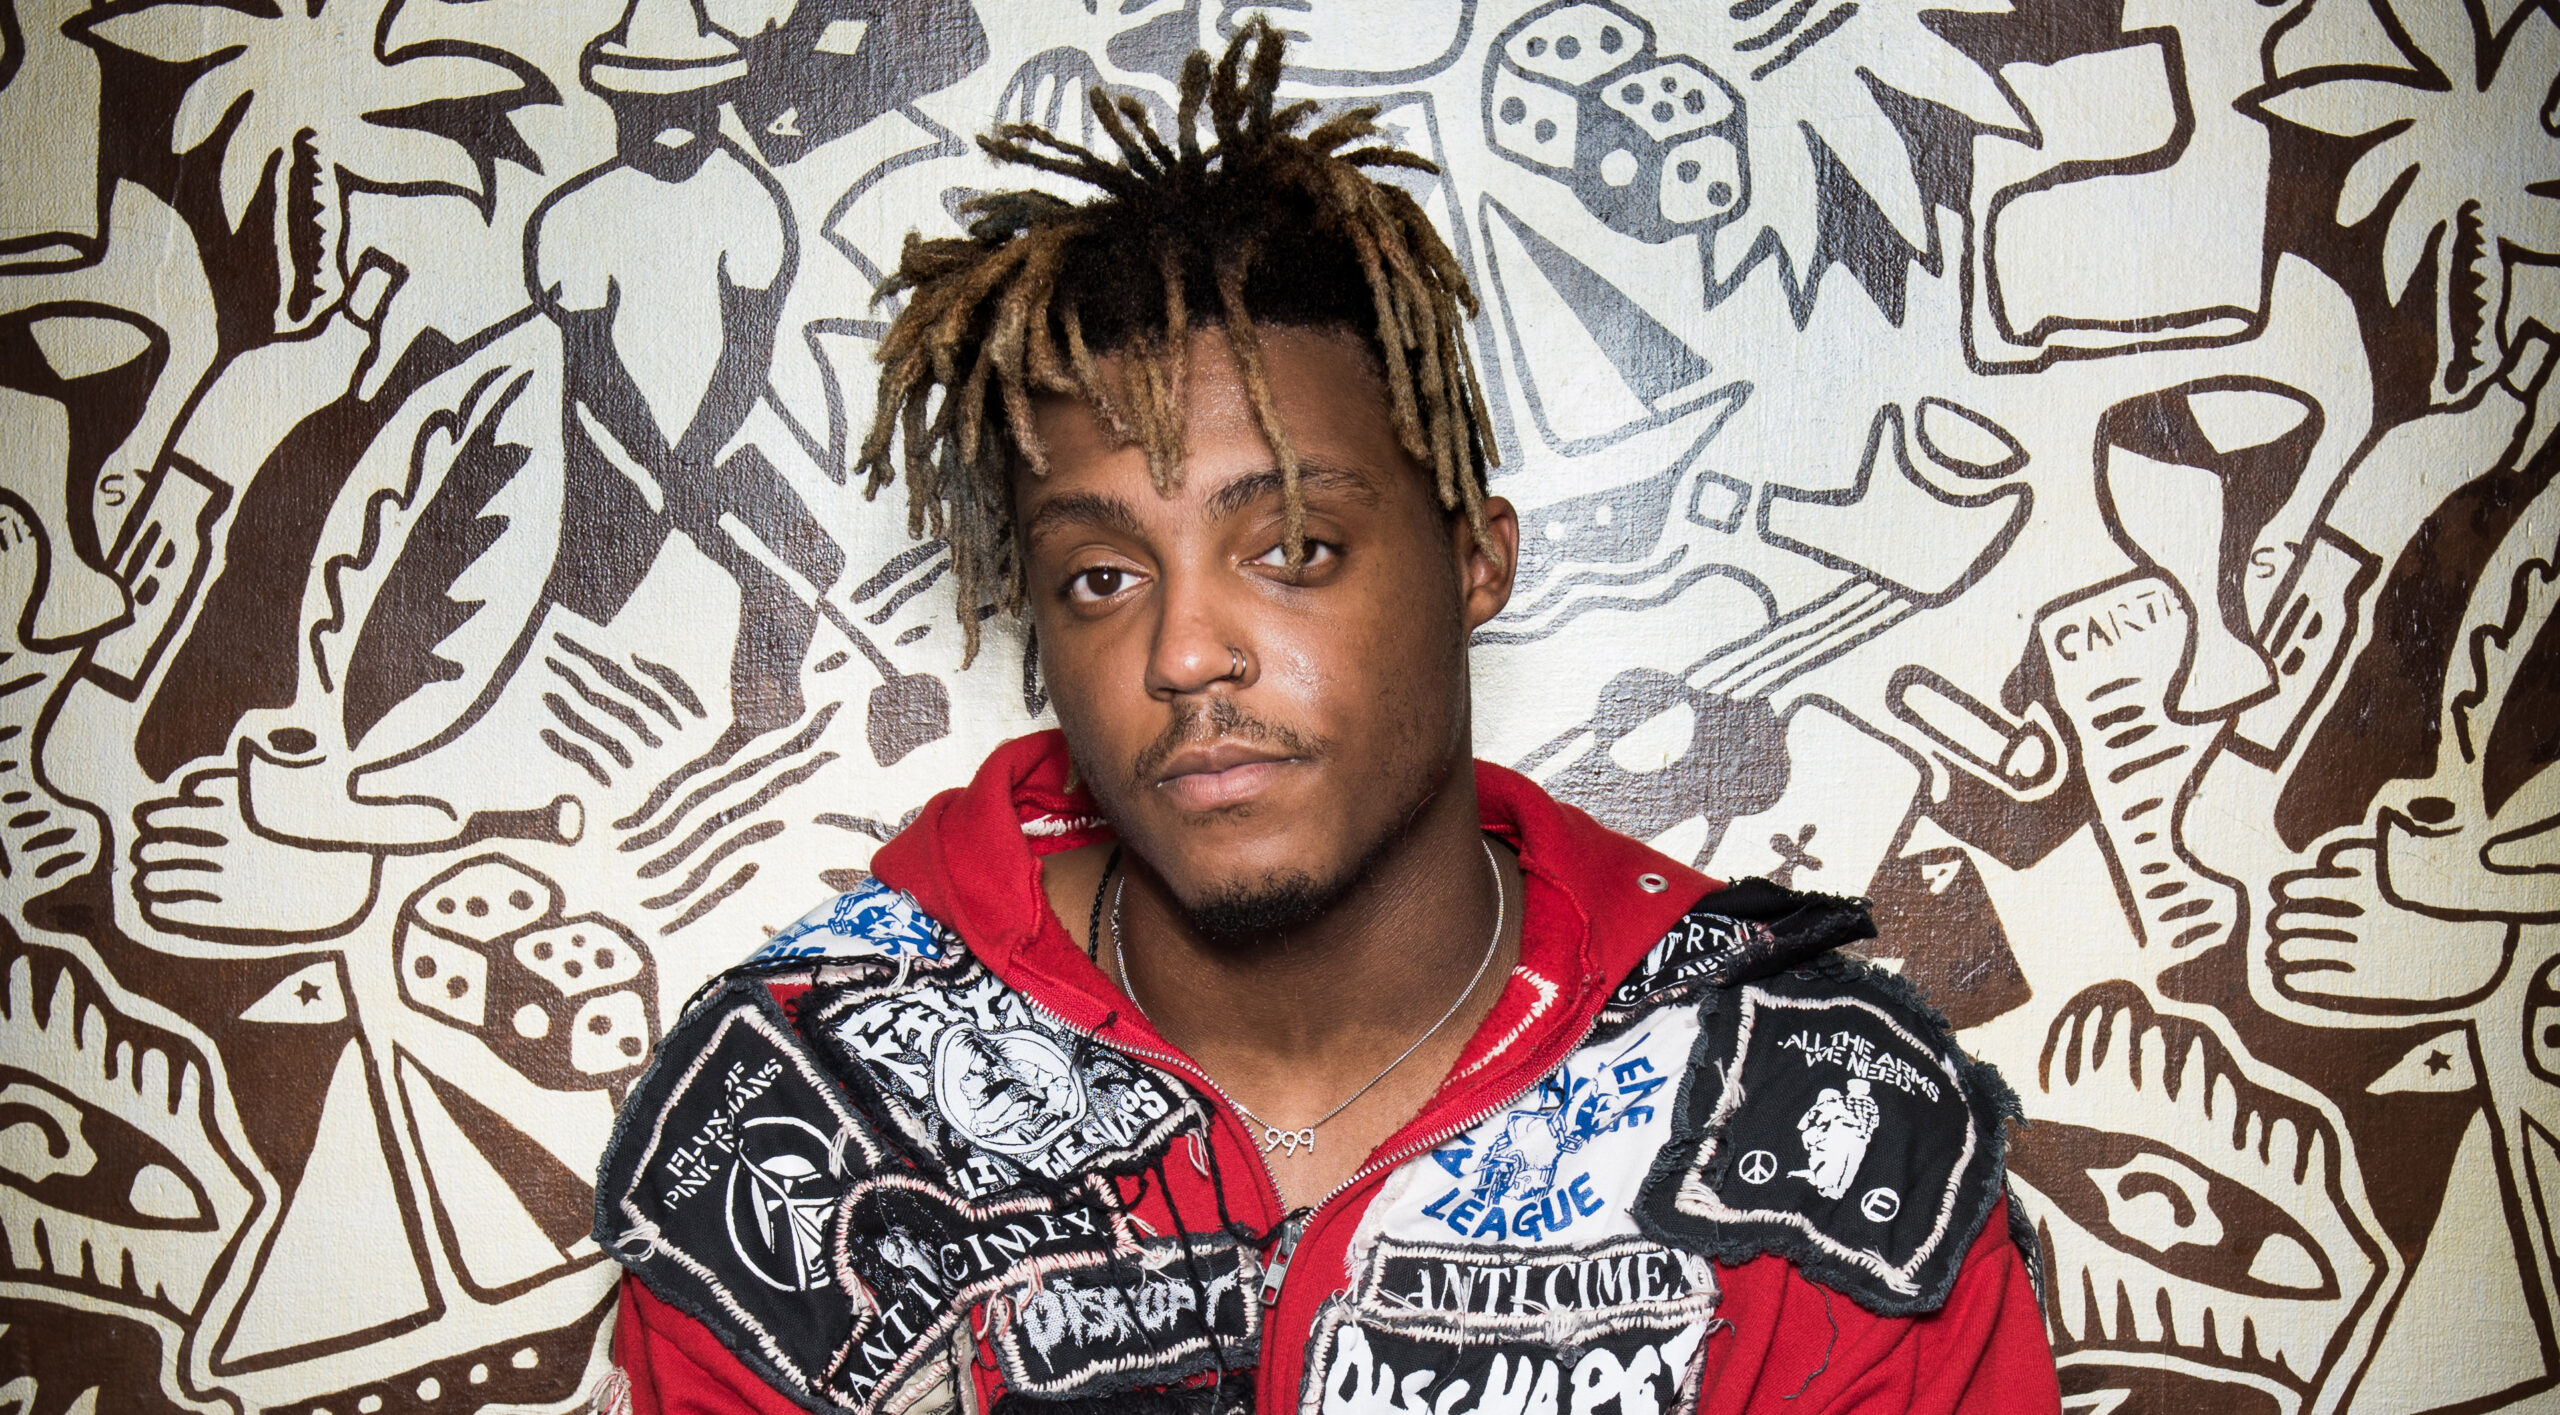 Juice WRLD – 'Legends Never Die' review: a painful reminder of the young  rapper's talent